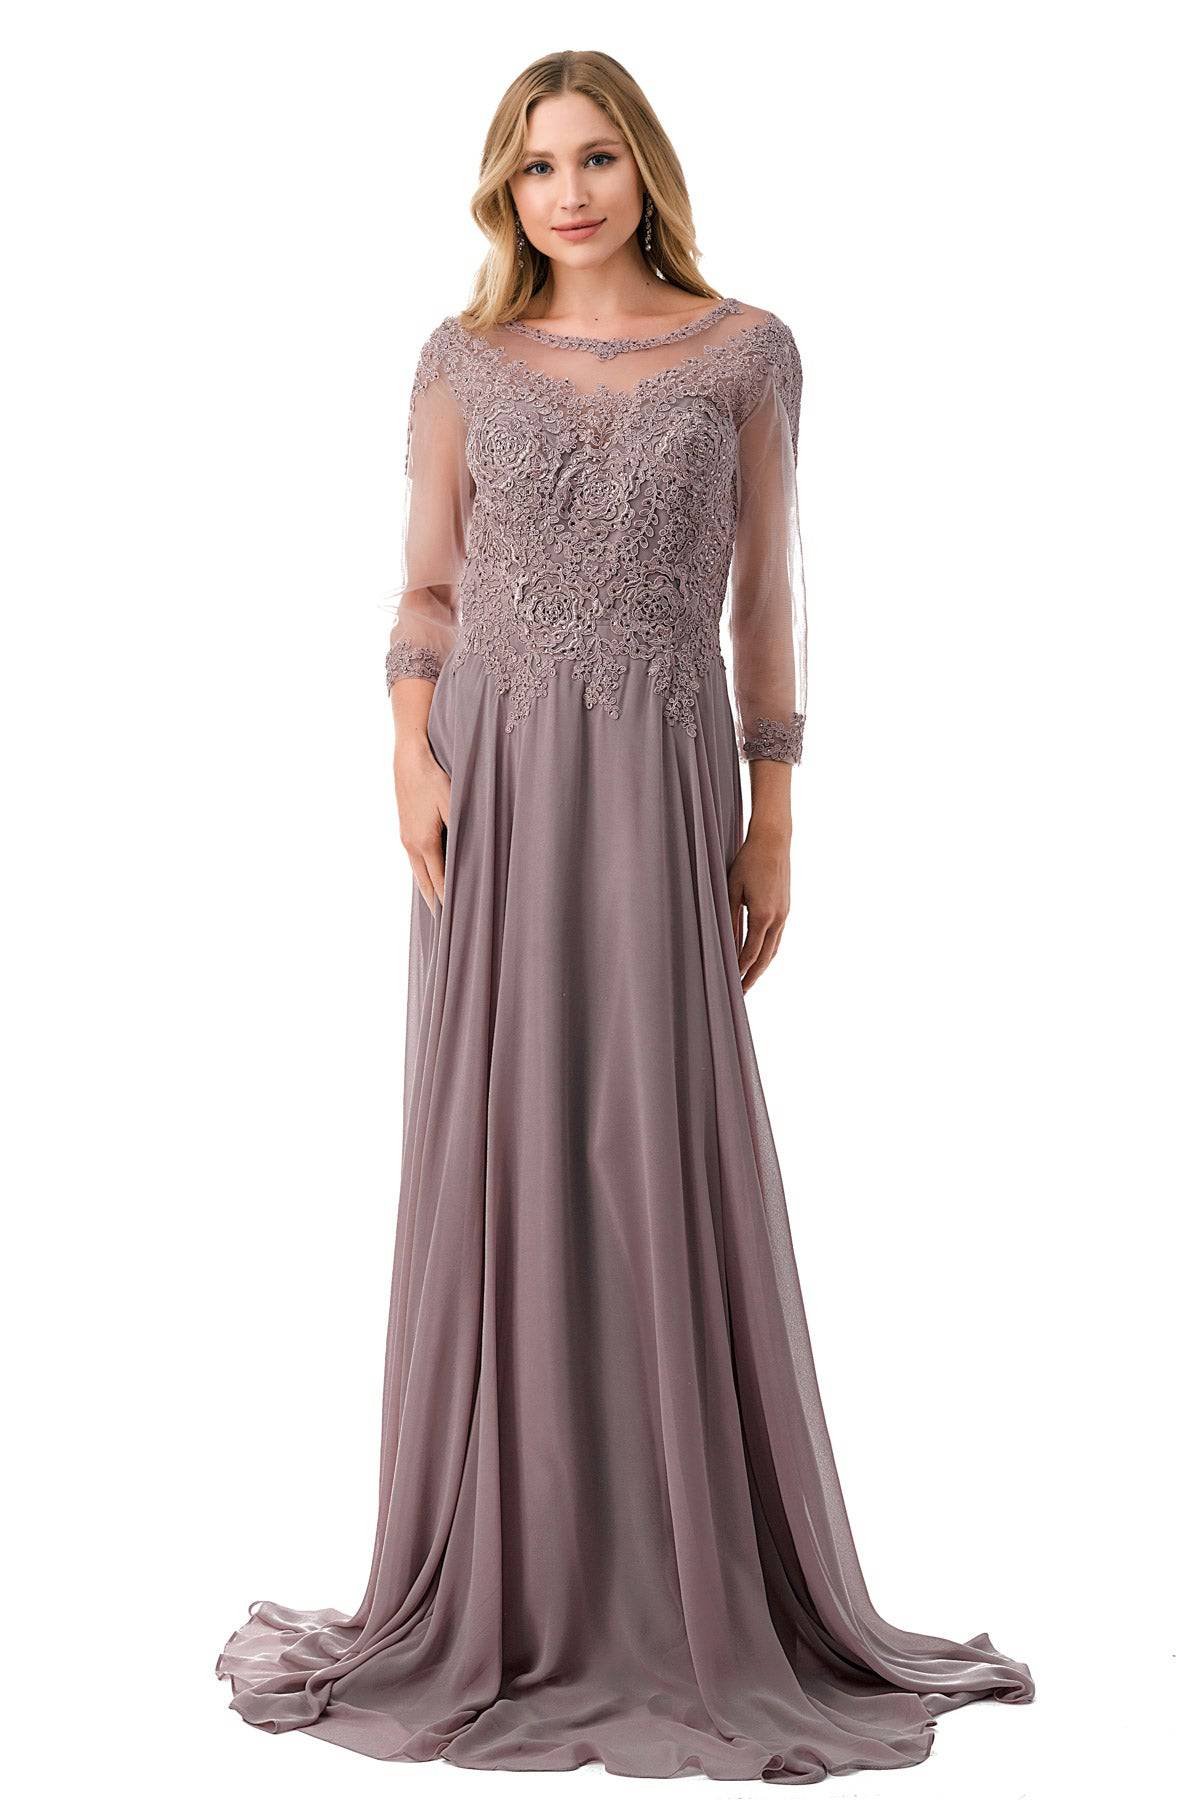 Aspeed M2723J Lace Embroidered 3/4 Sleeve Chiffon Dress - NORMA REED